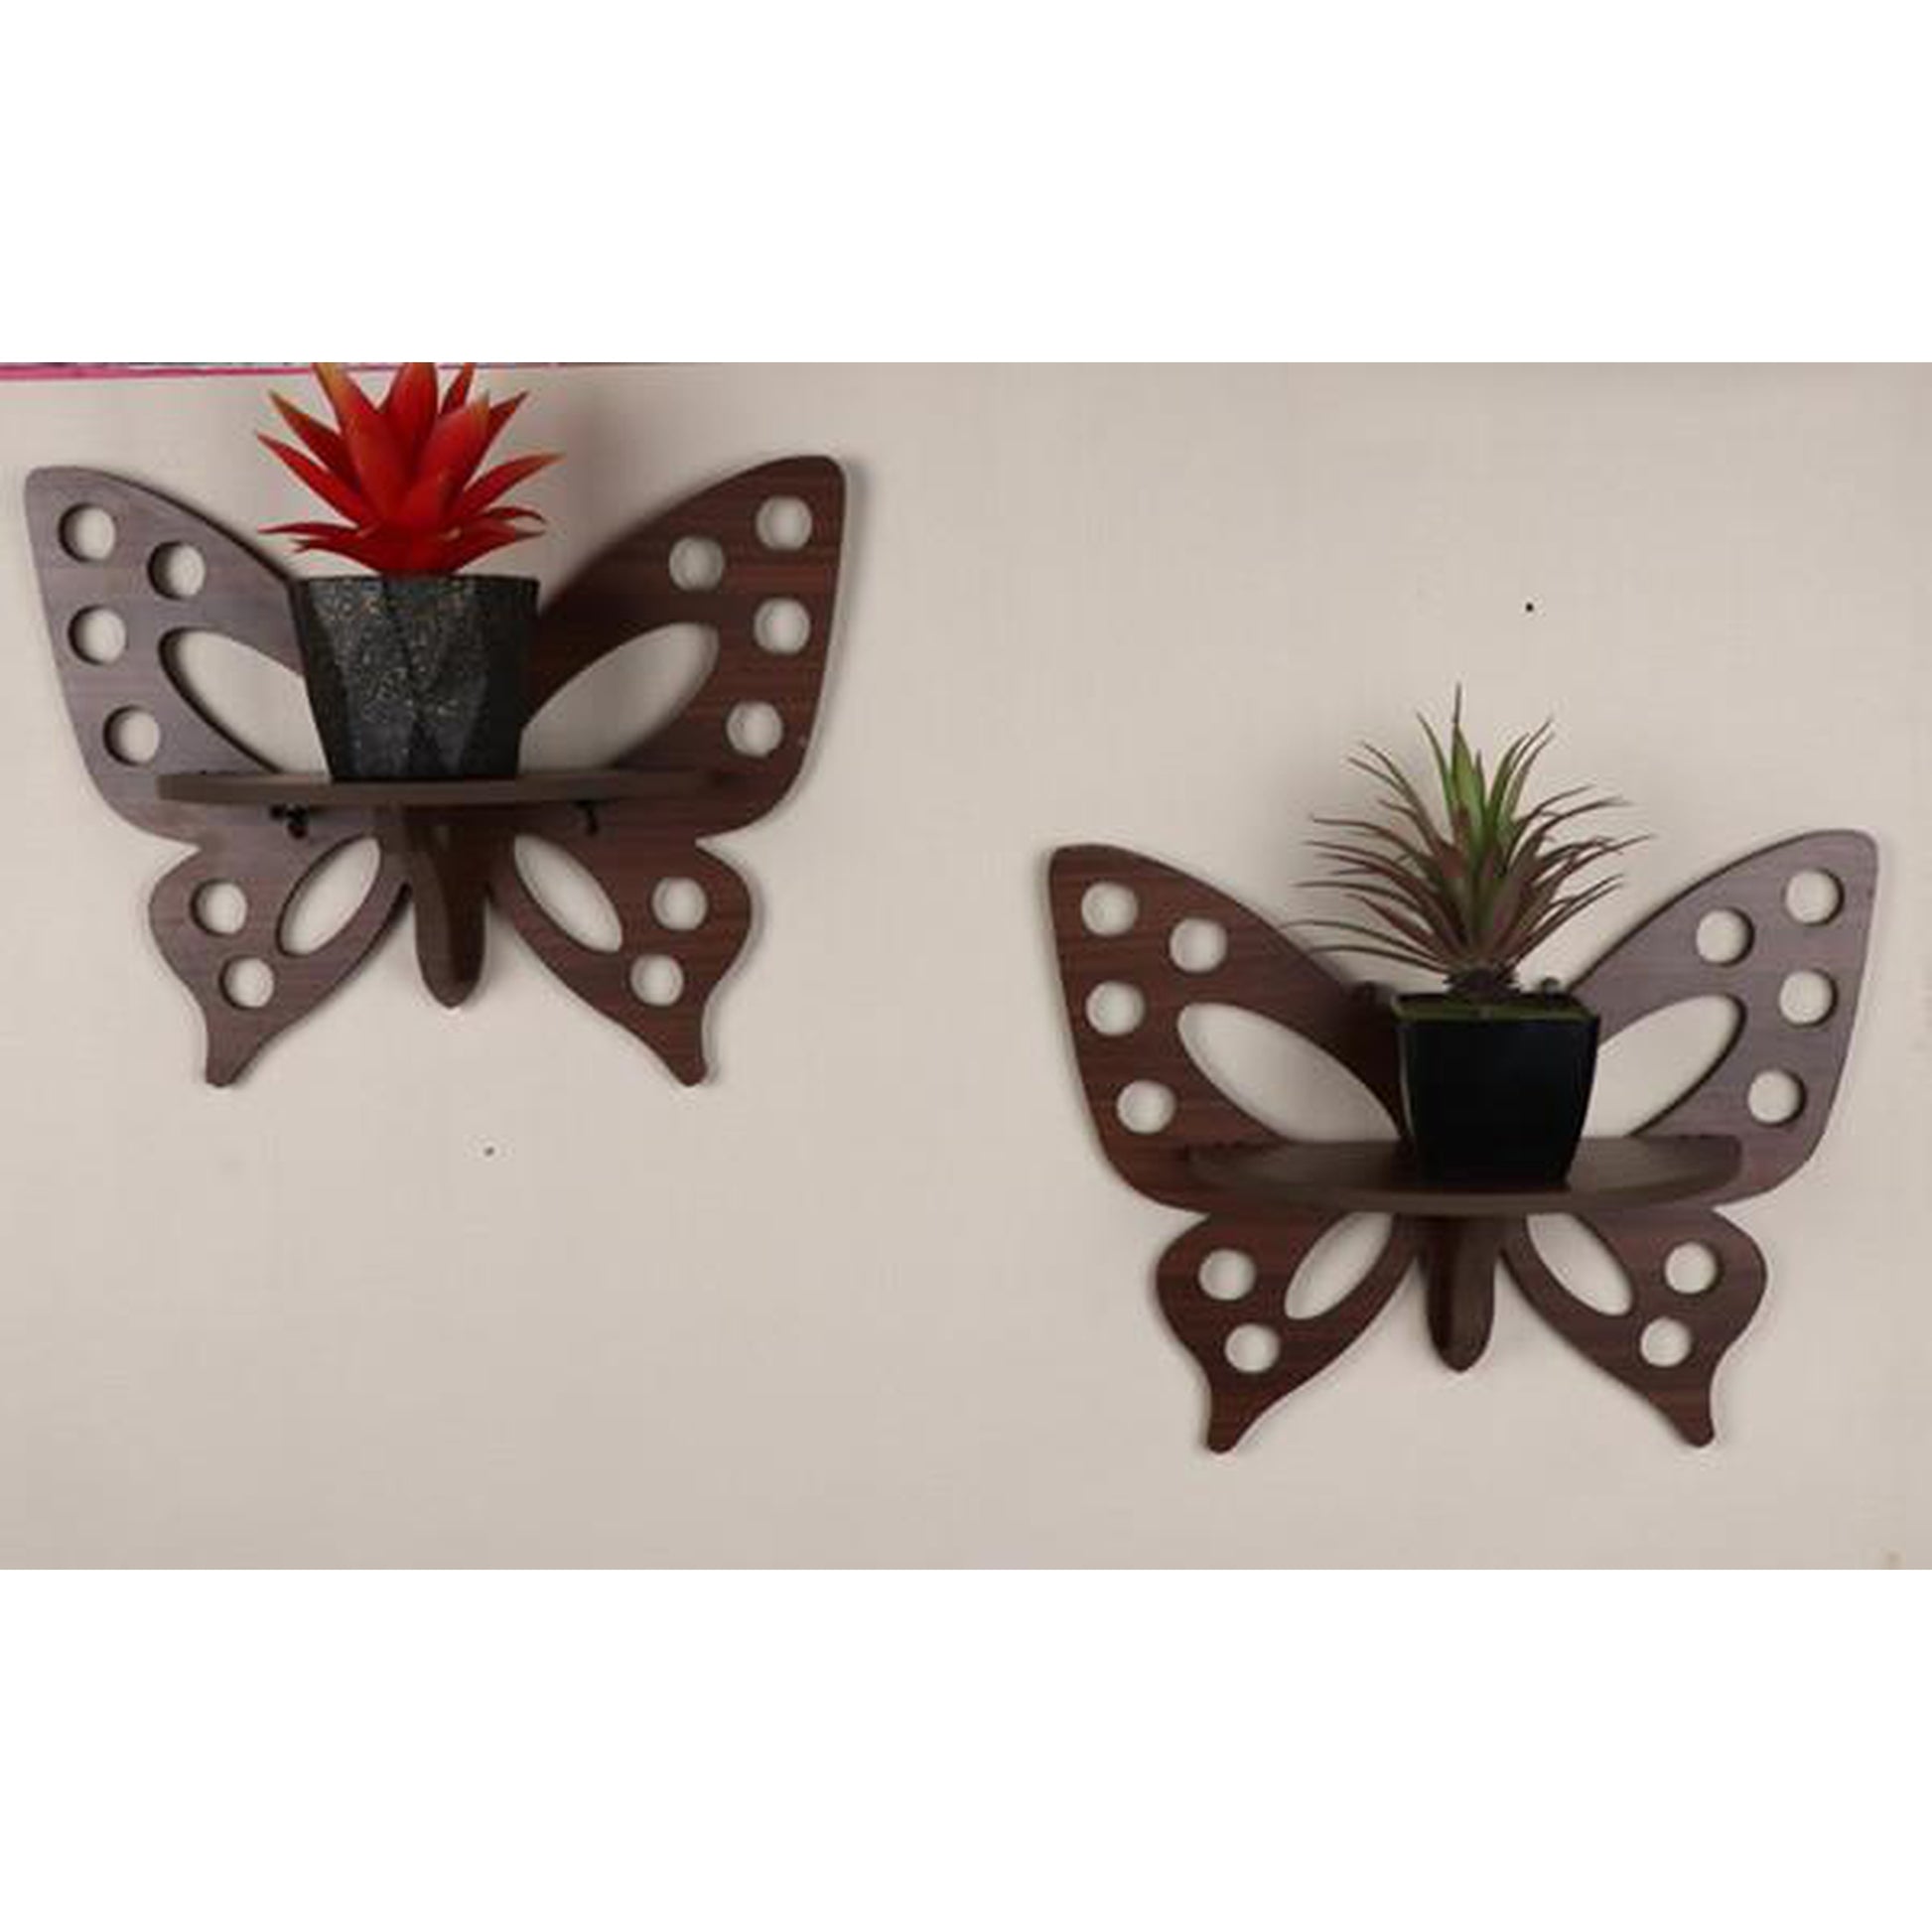 Engineered Wooden Set of Two Butterfly Wall Shelf/Stand - The Teal Thread